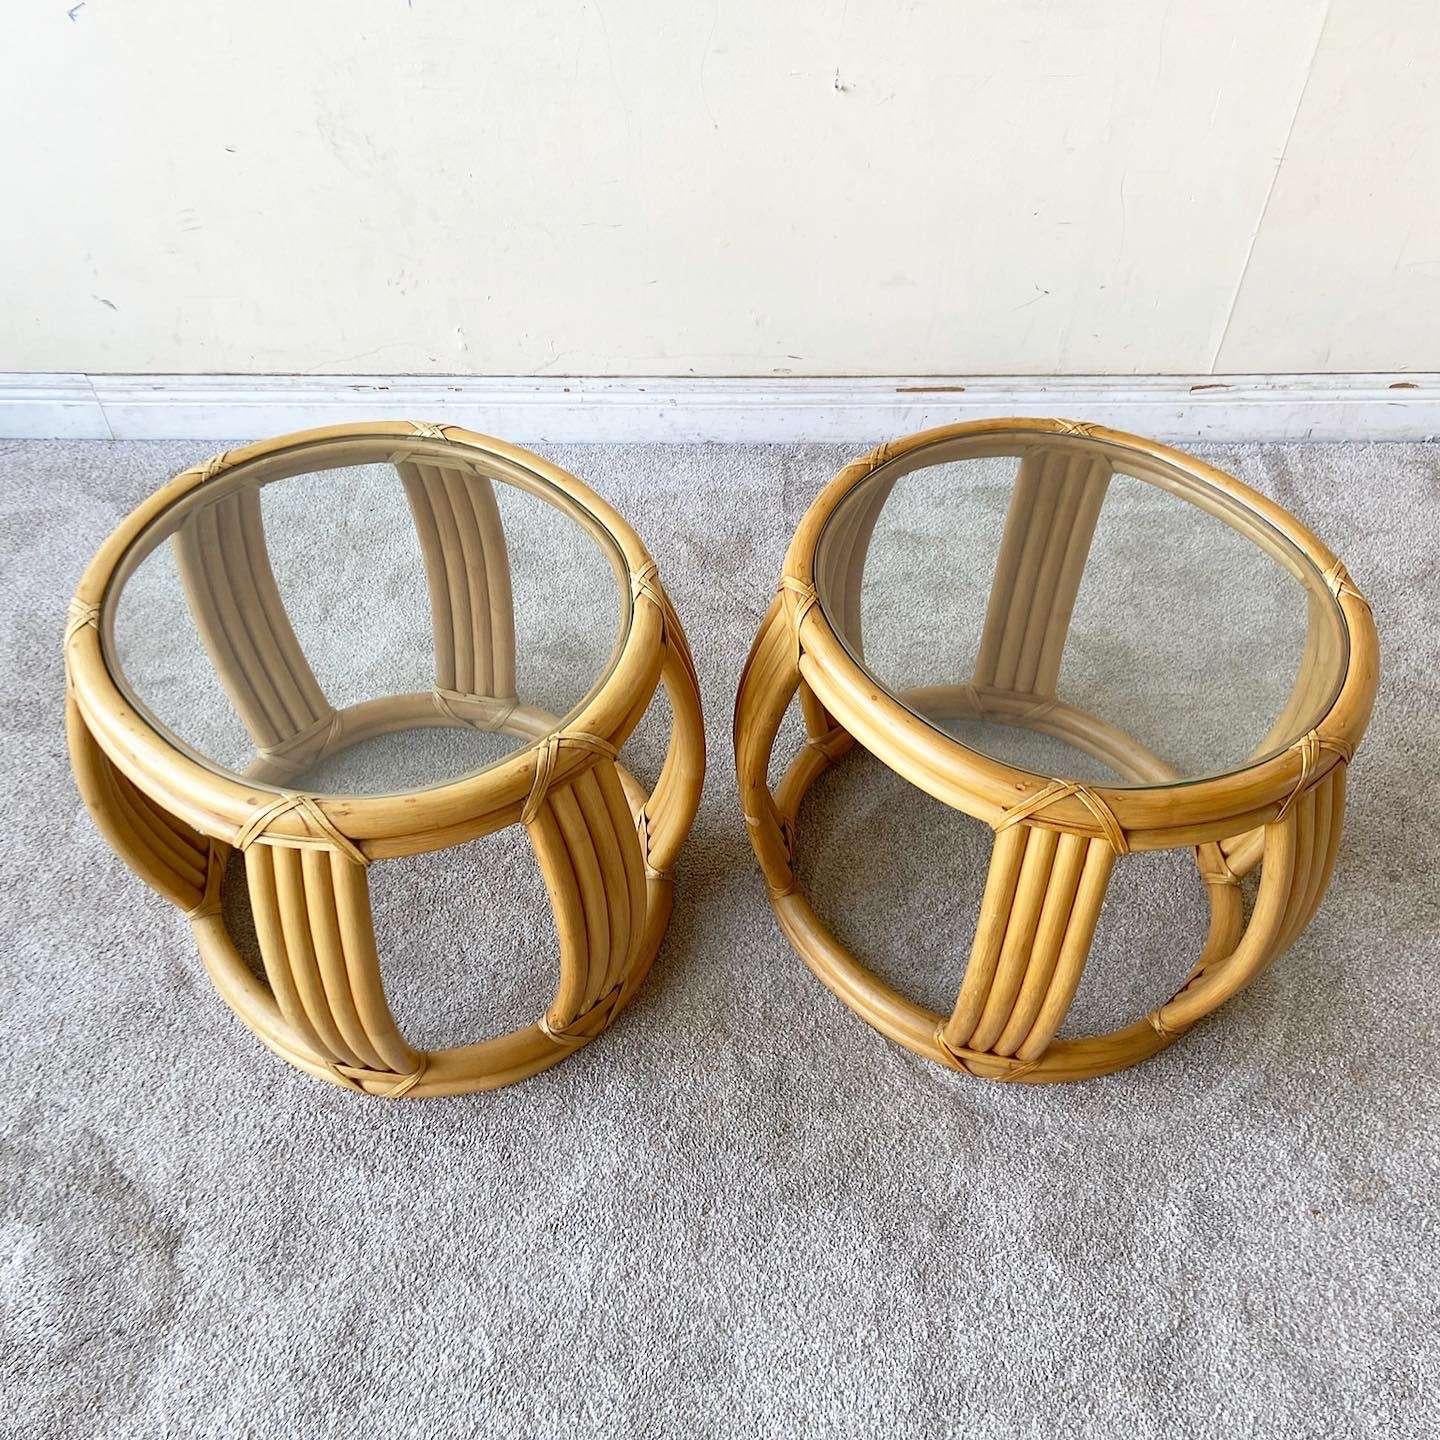 Exceptional pair of vintage bohemian bamboo rattan side tables. Features an oval shape with a glass top.l and natural finish.